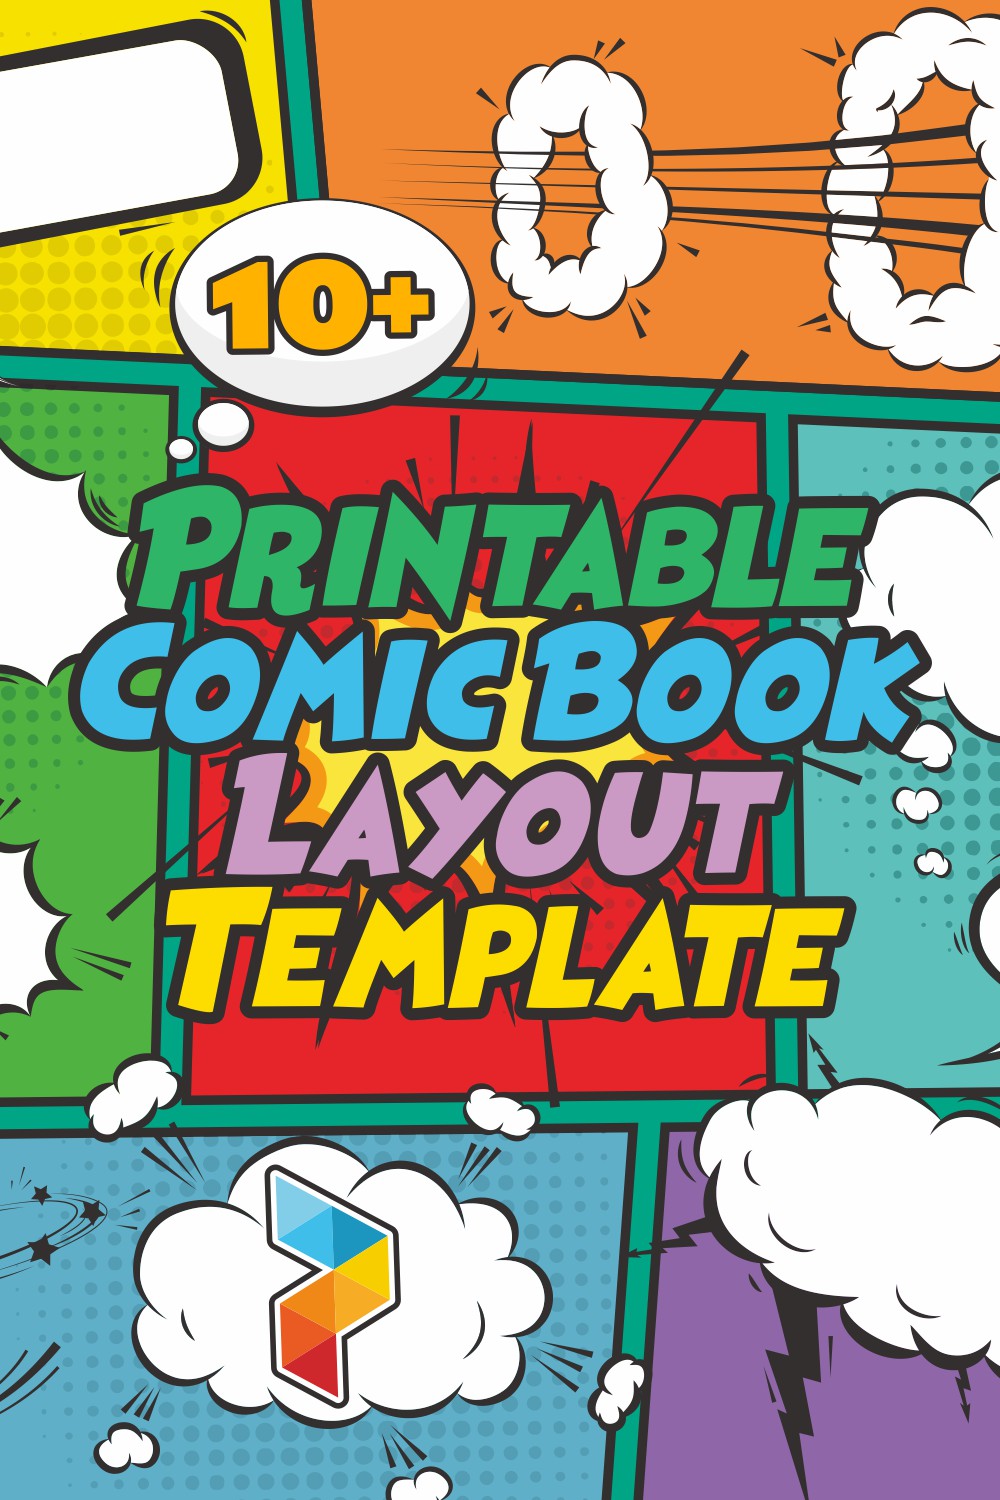 Comic Book Layout Template